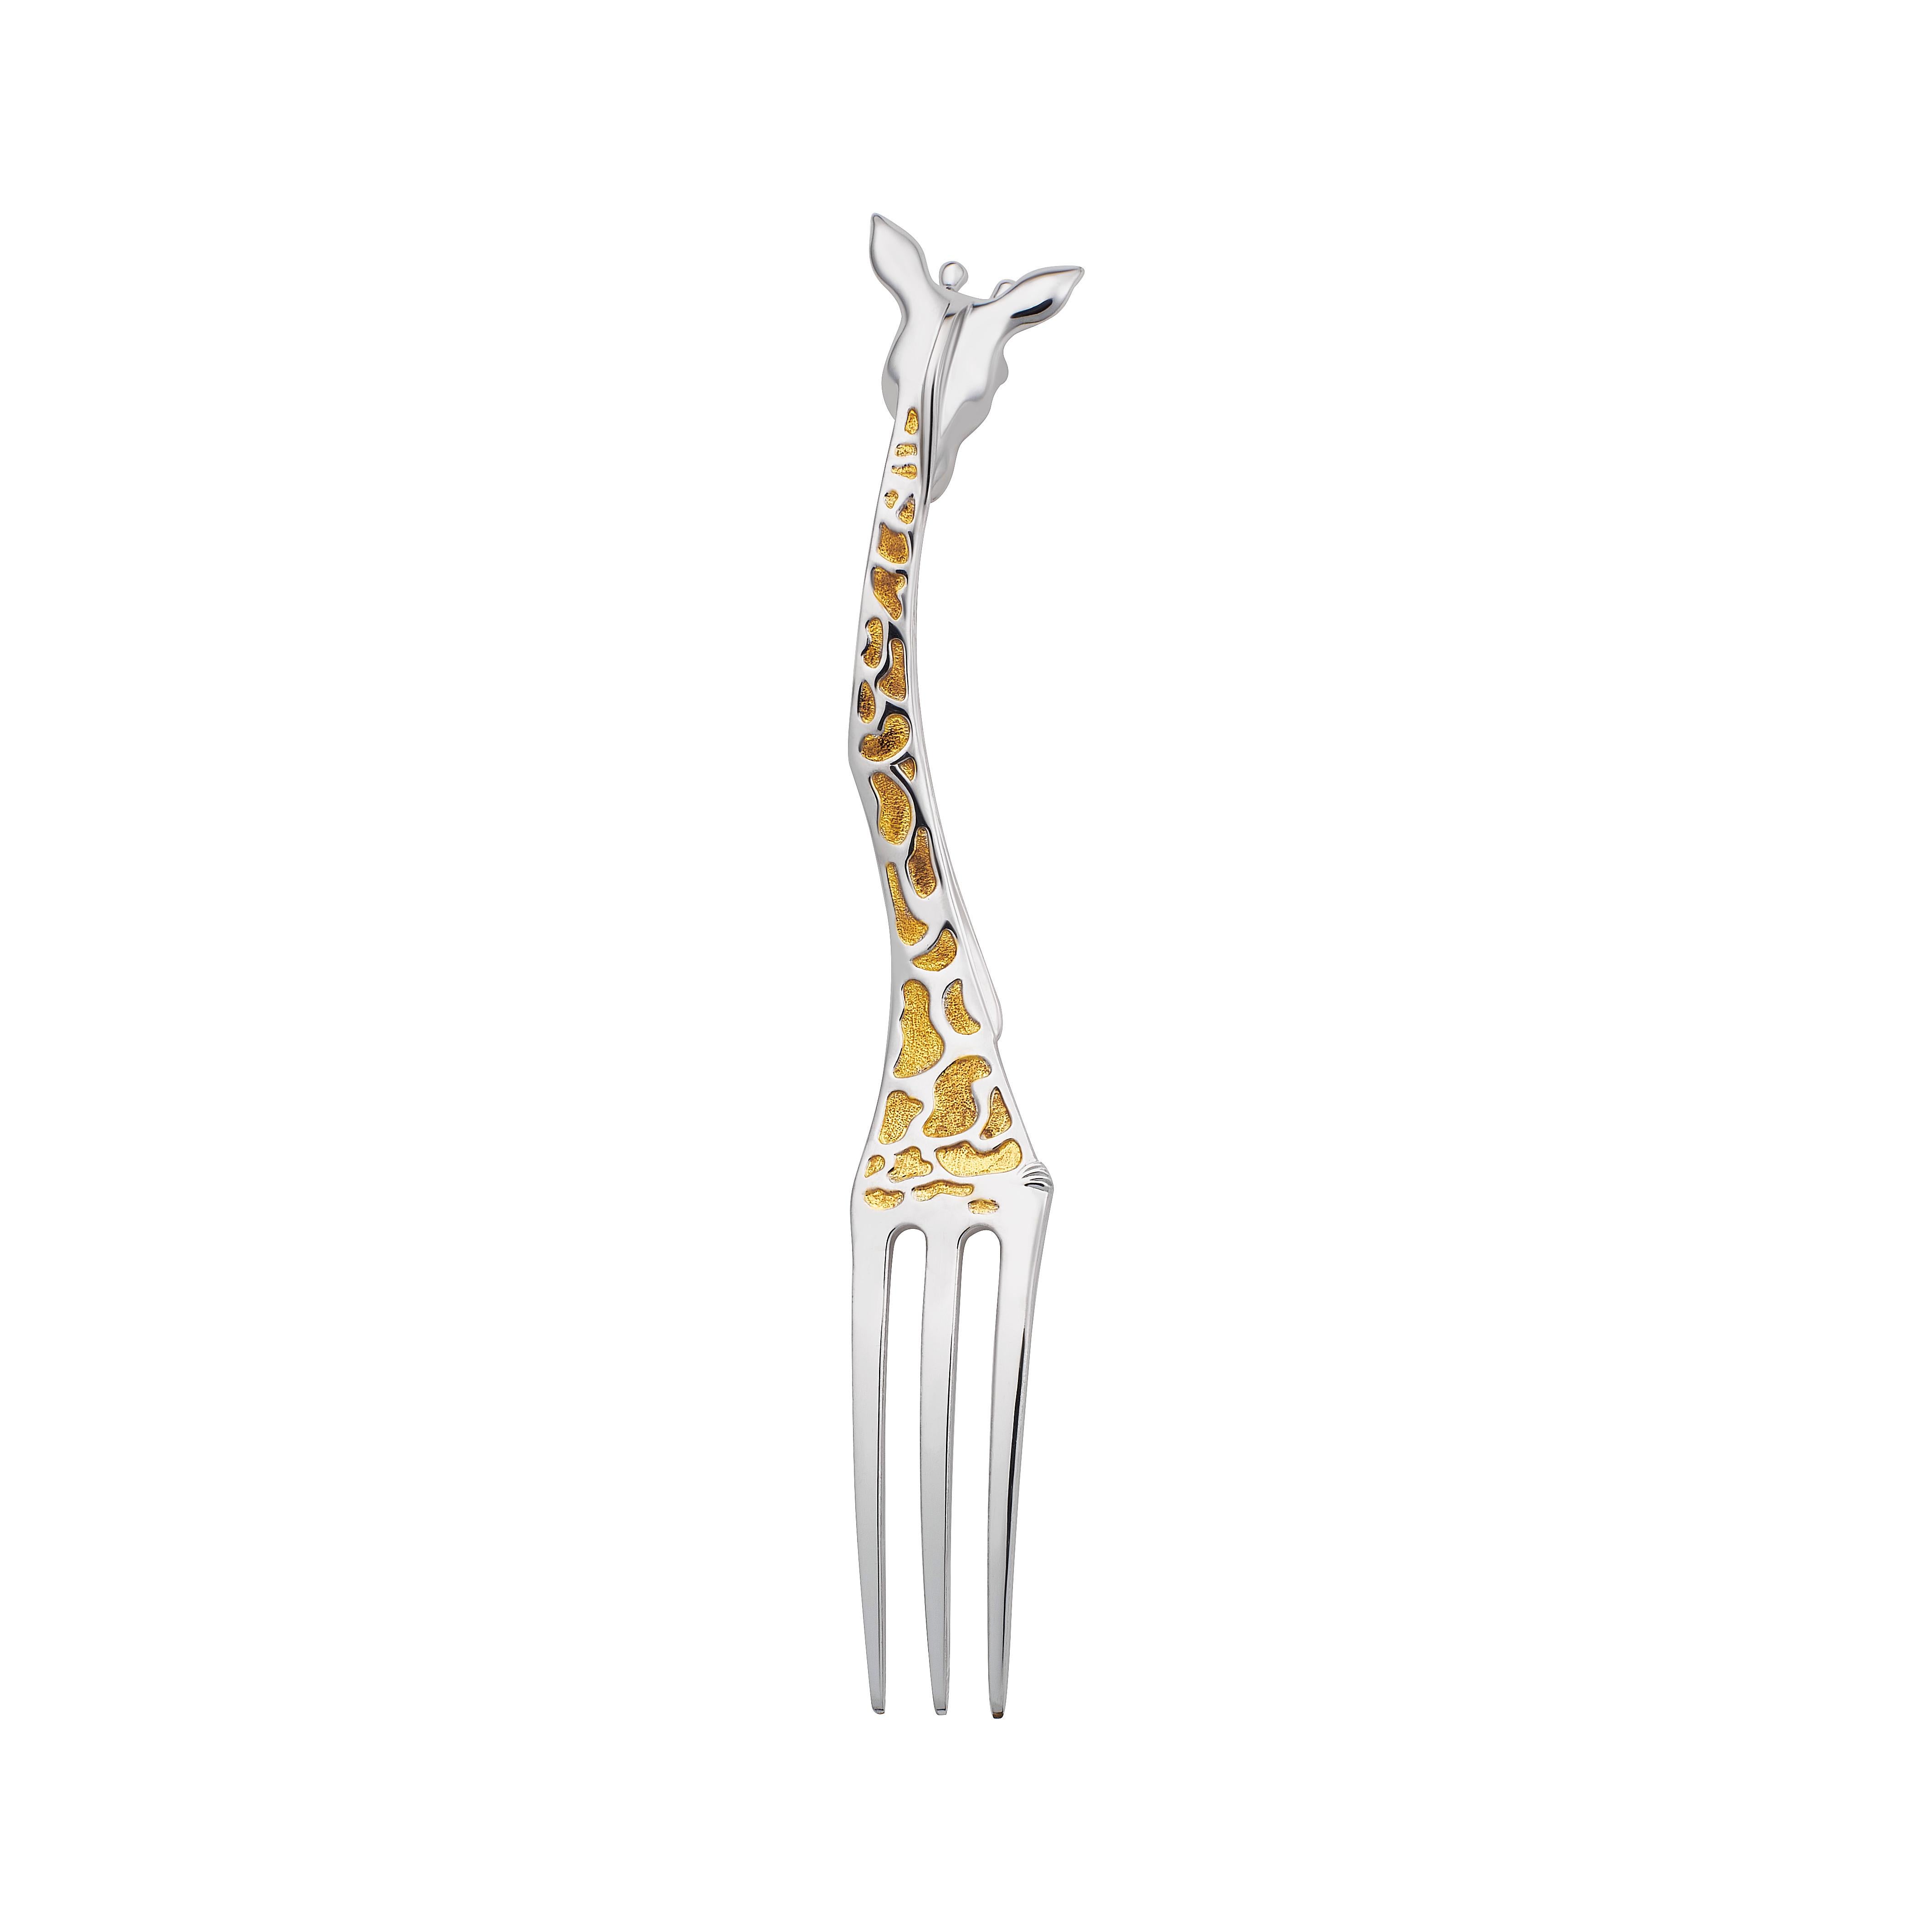 An adorable luxurious Giraffe Fork from MOISEIKIN®  is made of  925 sterling silver with indium, rhodium and careful gilding. Adding indium preserves the glossy look and its durability and  a thin layer of metal from the platinum group - rhodium